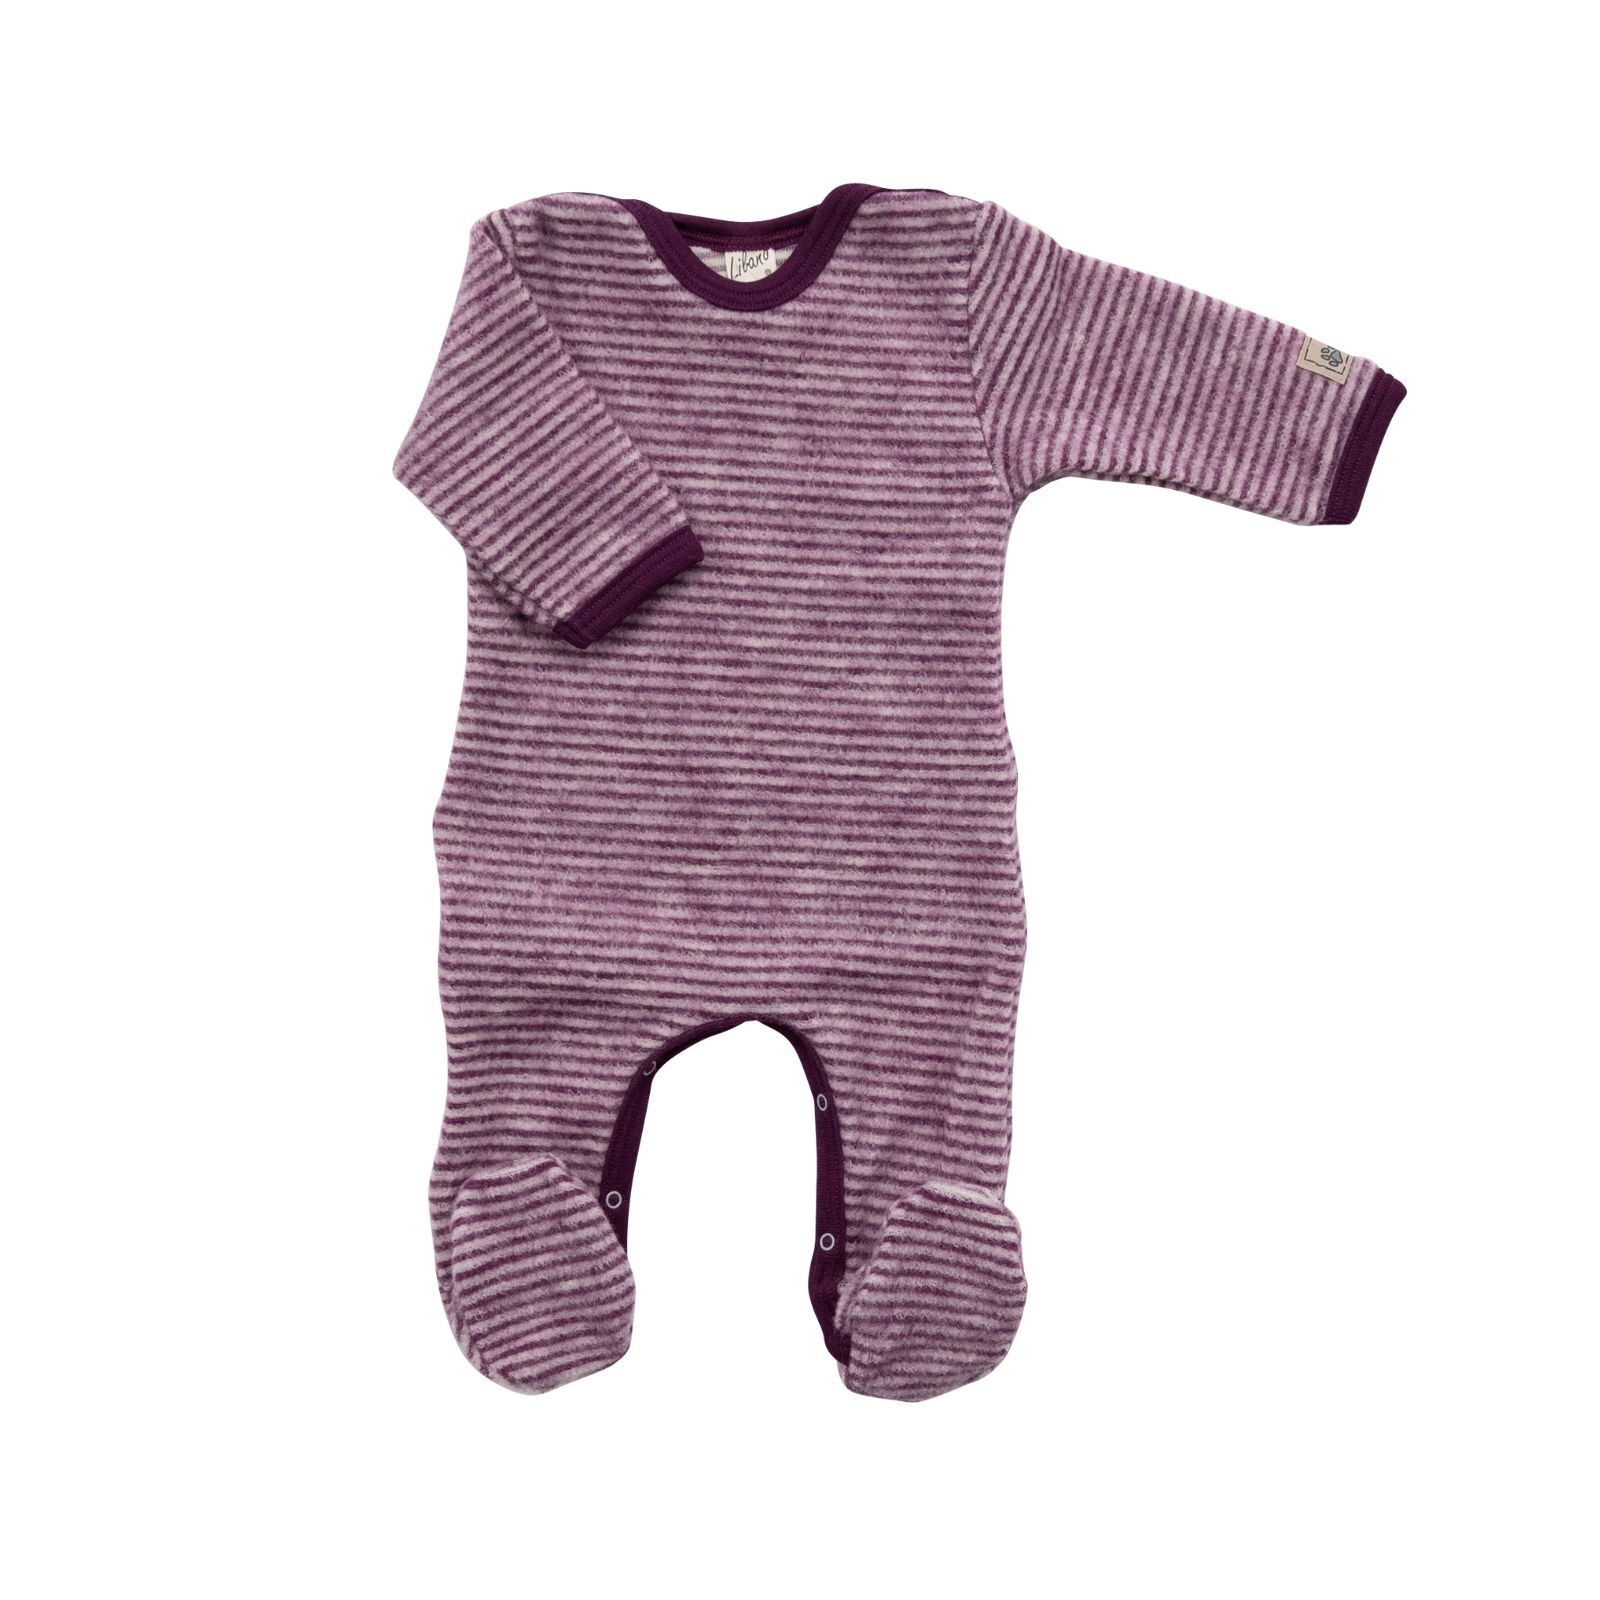 Lilano Baby Overall Wollfrottee mit Fu